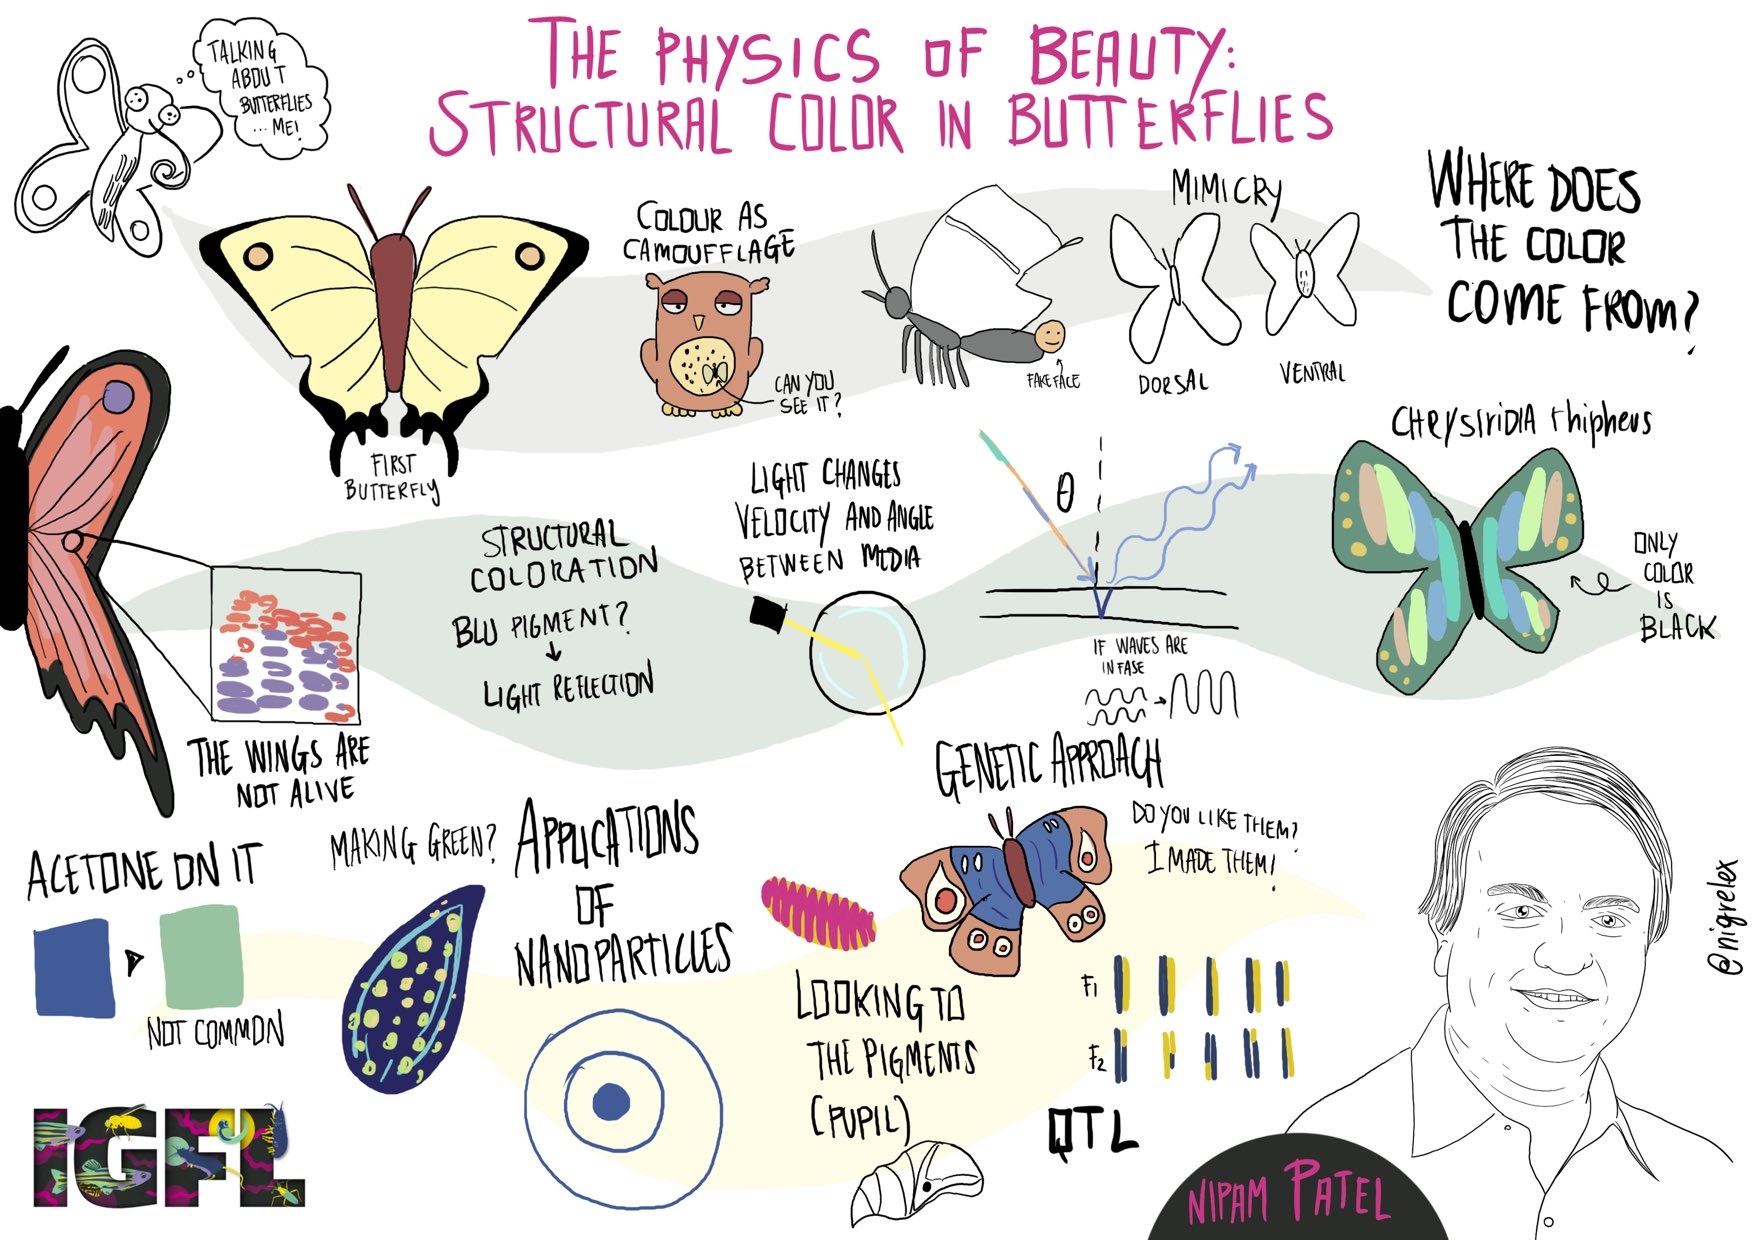 A cartoon of Nipam Patel's talk at #IGFLSymposium in Lyon, France by Eleonora Nigro. Talk titled "The Physics of Beauty: Structural Color in Butterflies"